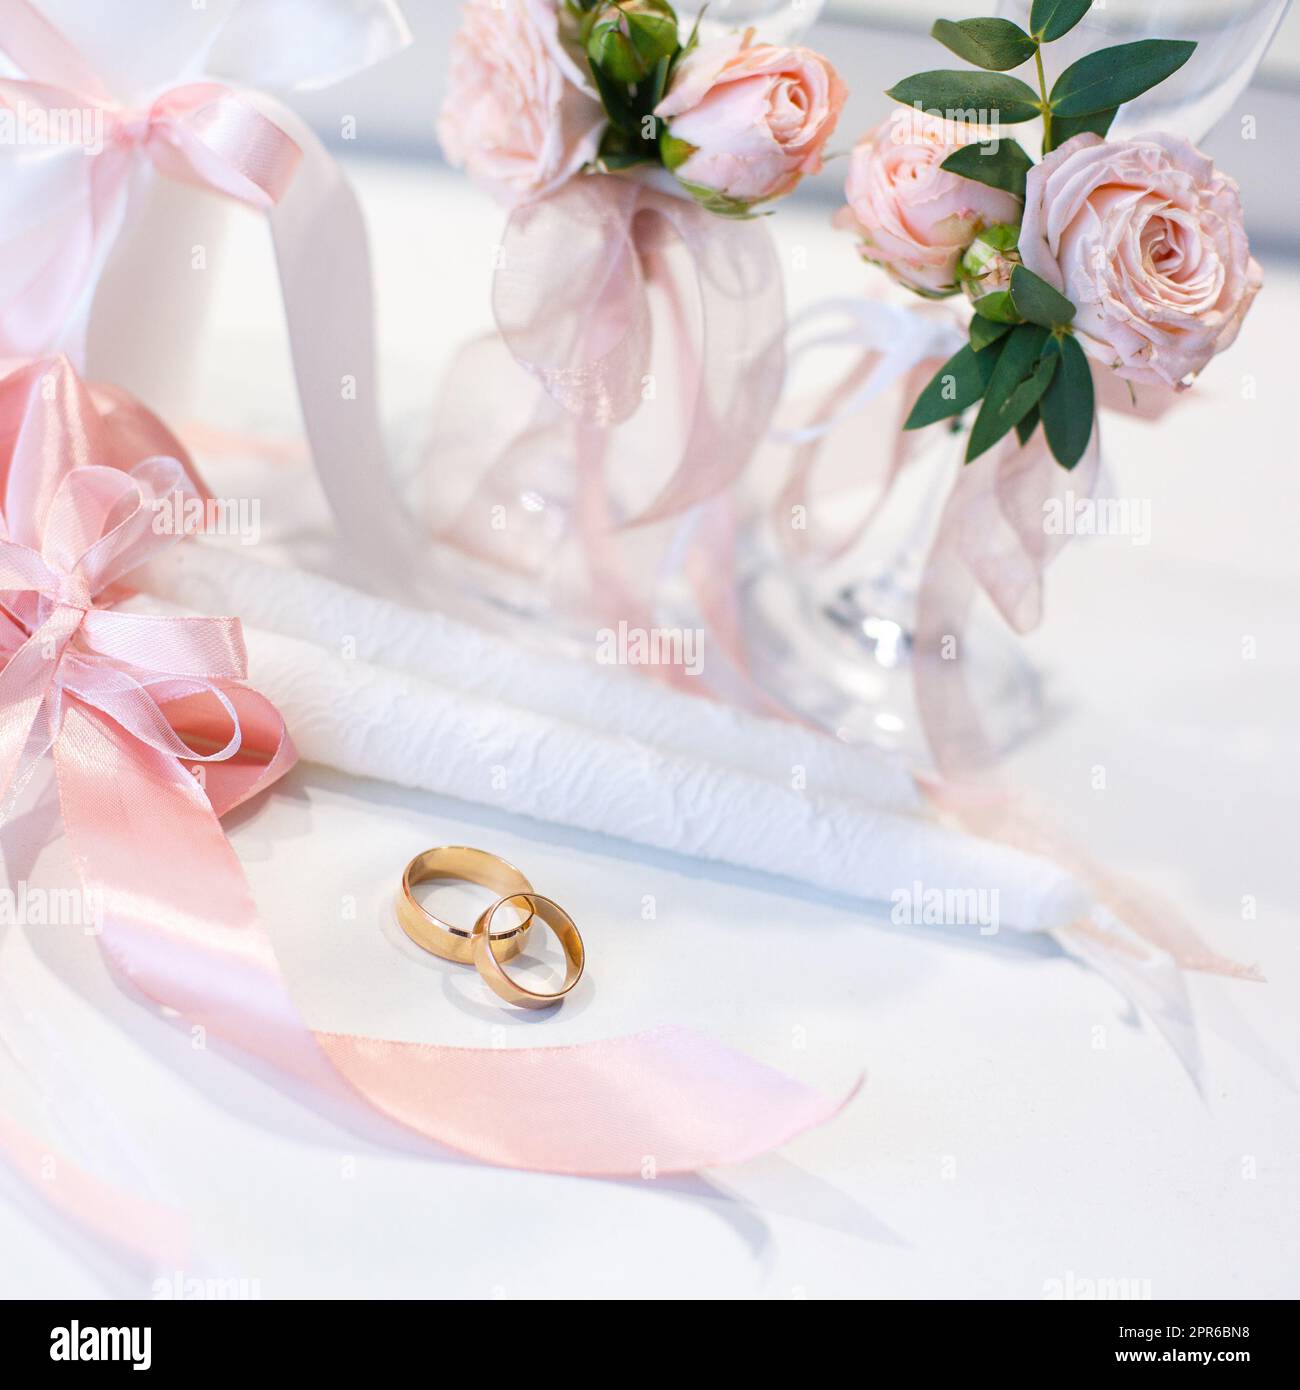 Gold wedding rings lie on the table near the wedding candles. Stock Photo